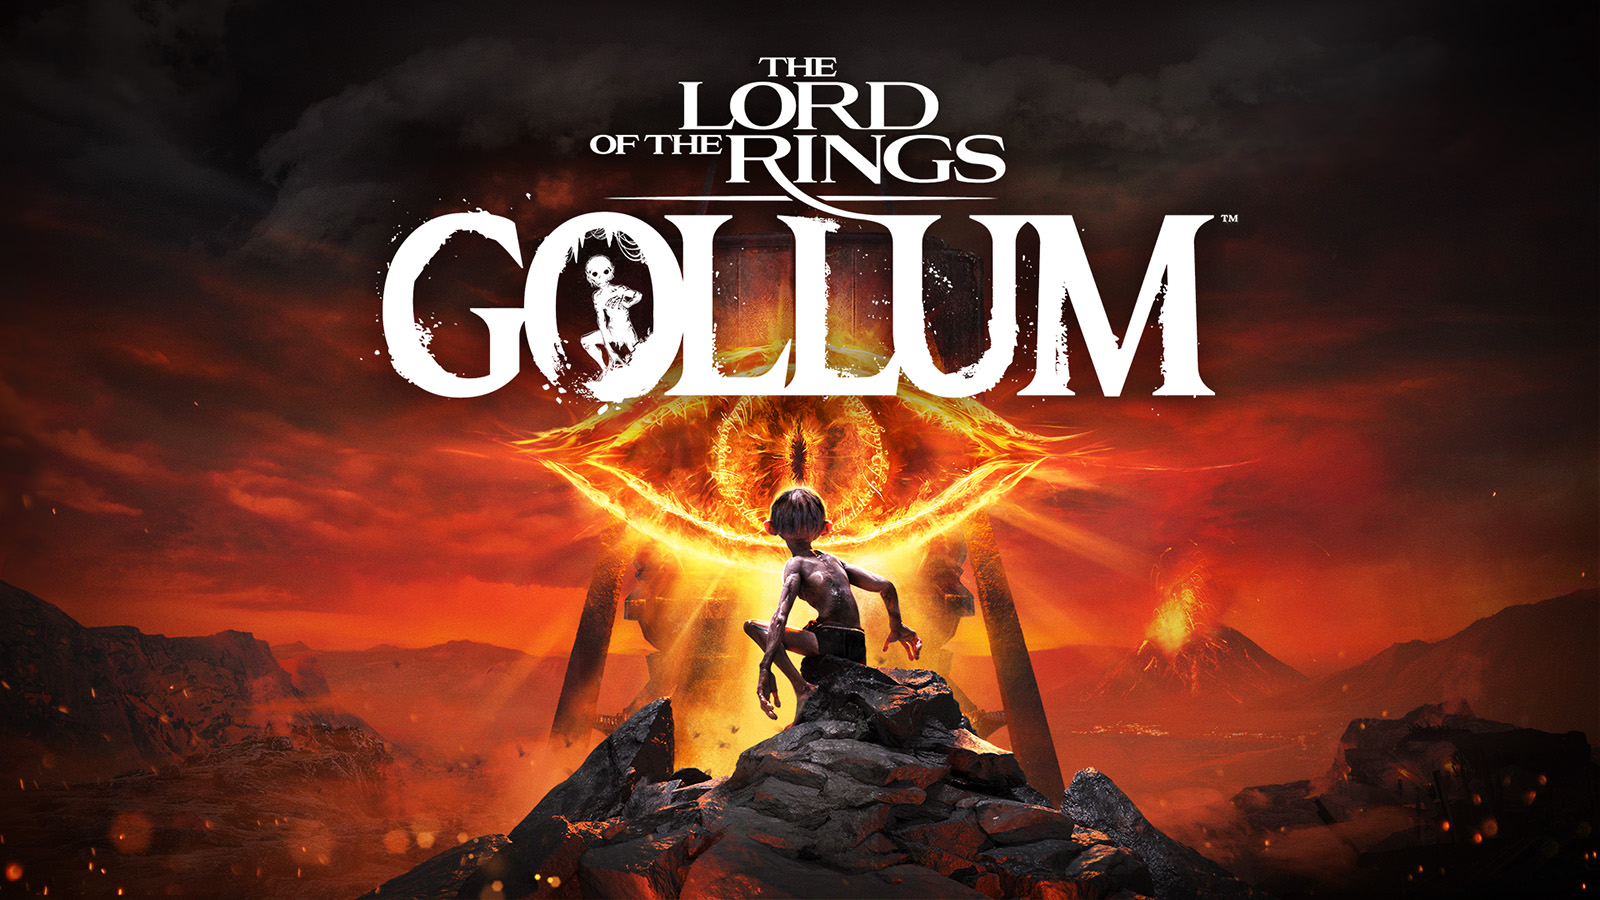 The Lord Of The Rings: Gollum ‘Precious Edition’ Announced